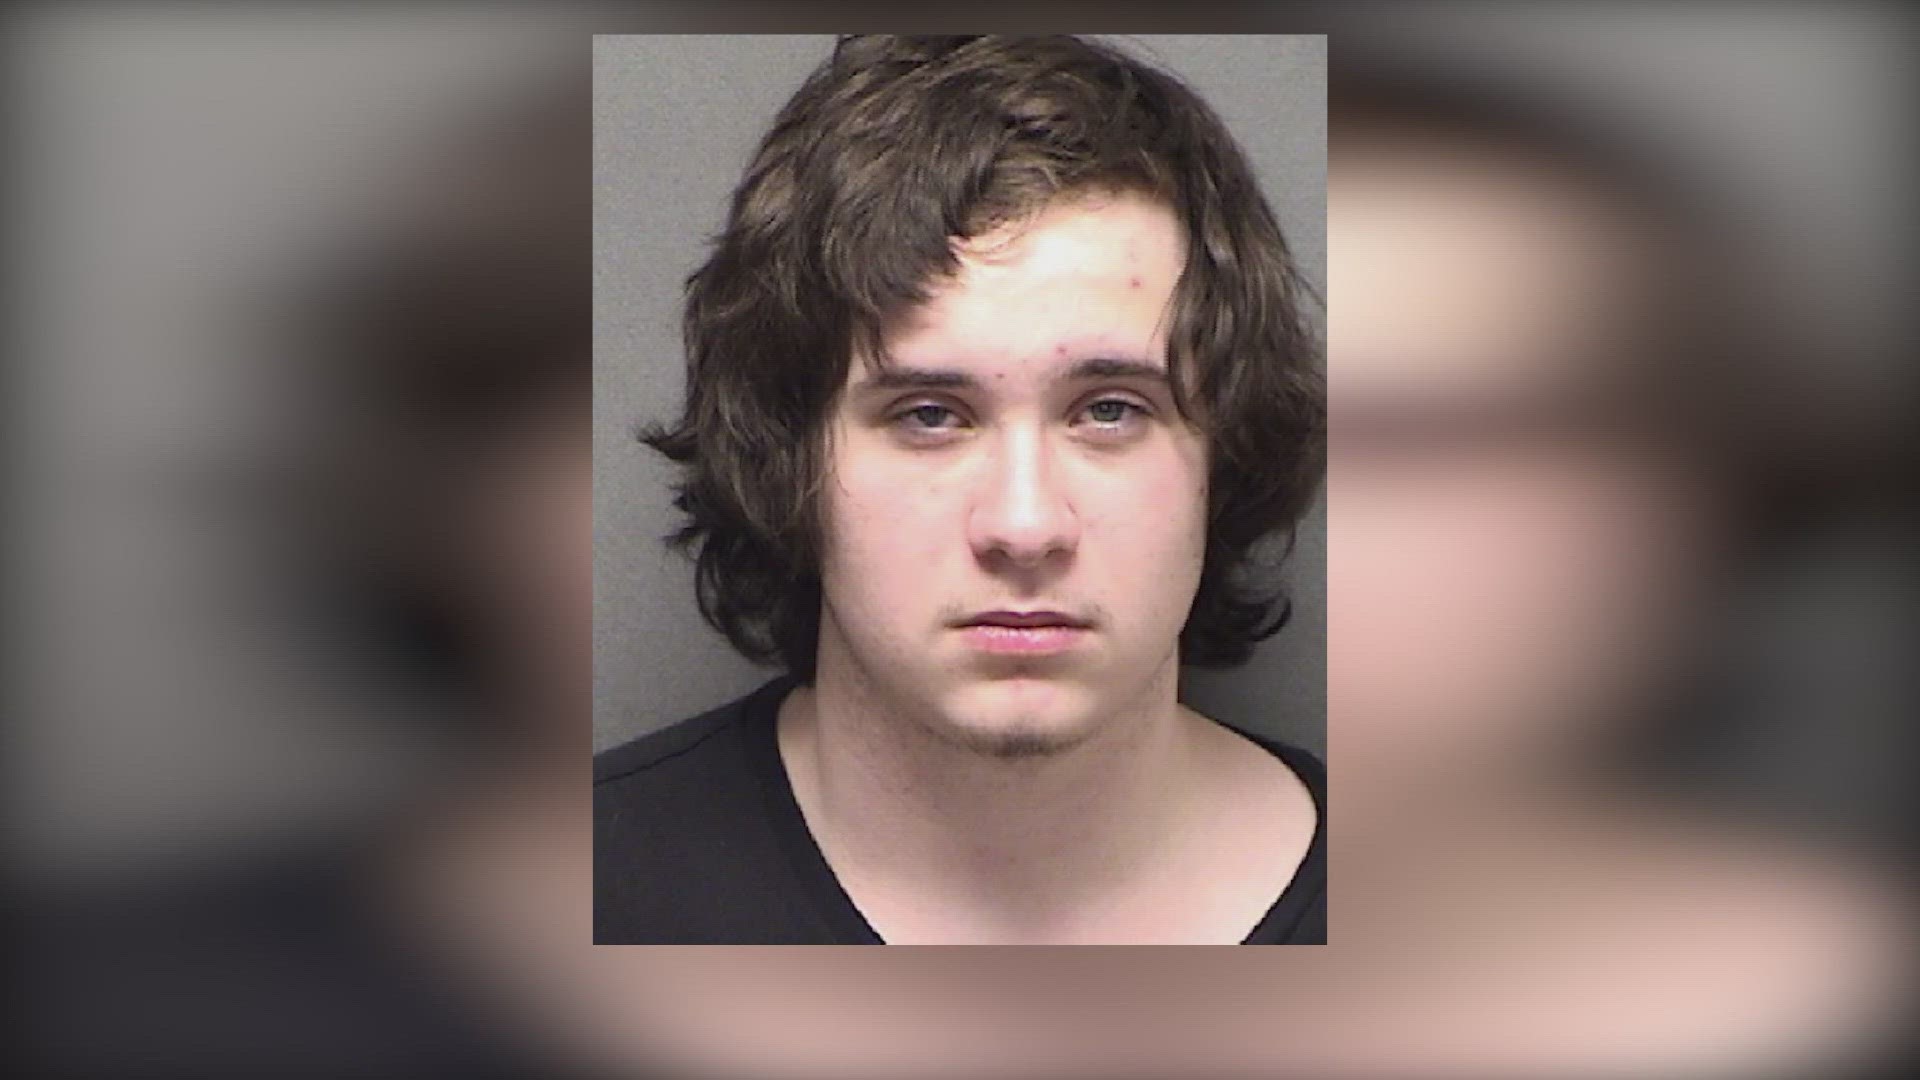 Tristen Stadel, 18, is charged with super aggravated assault of a child. An arrest affidavit says he wouldn't discuss the incident but that he "knew it was wrong."